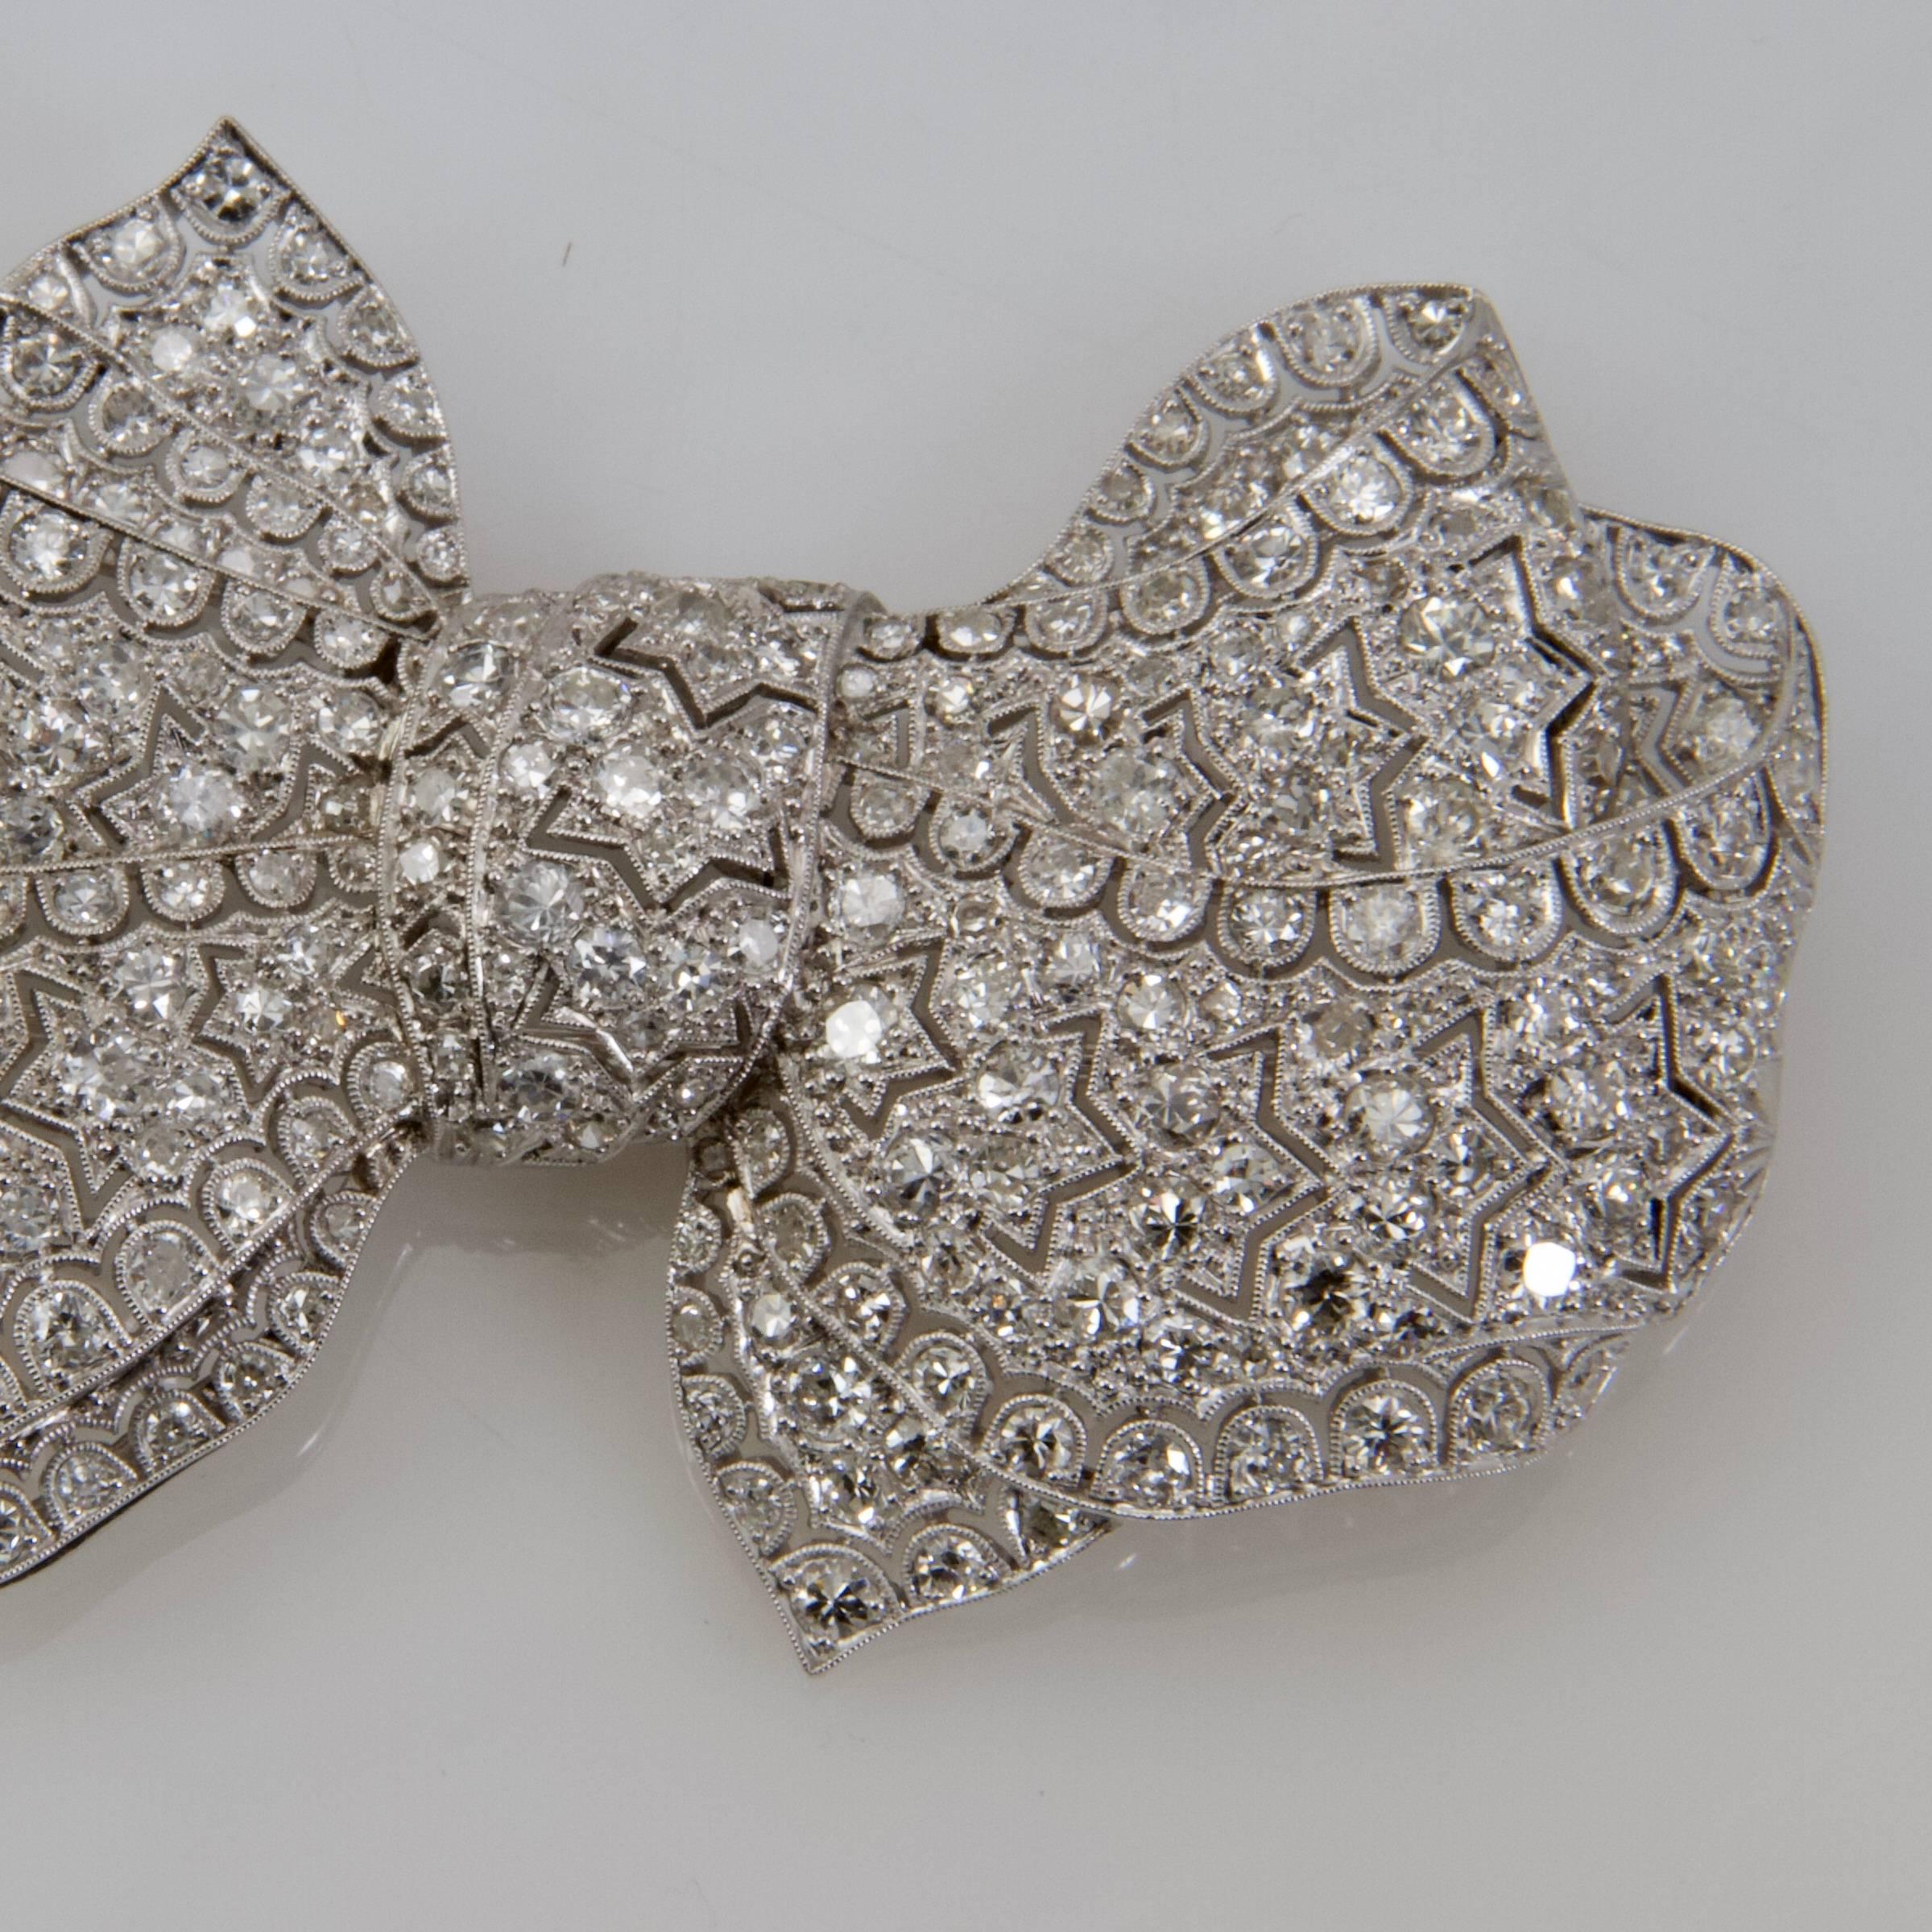 Platinum laced bow brooch set with round diamonds on a ground  decorated with stars and swags. 
Totally bordered with millegrain setting. 
Hoop for a pendant. 
Security system. 
French assays mark.
Maker's mark illegible.
